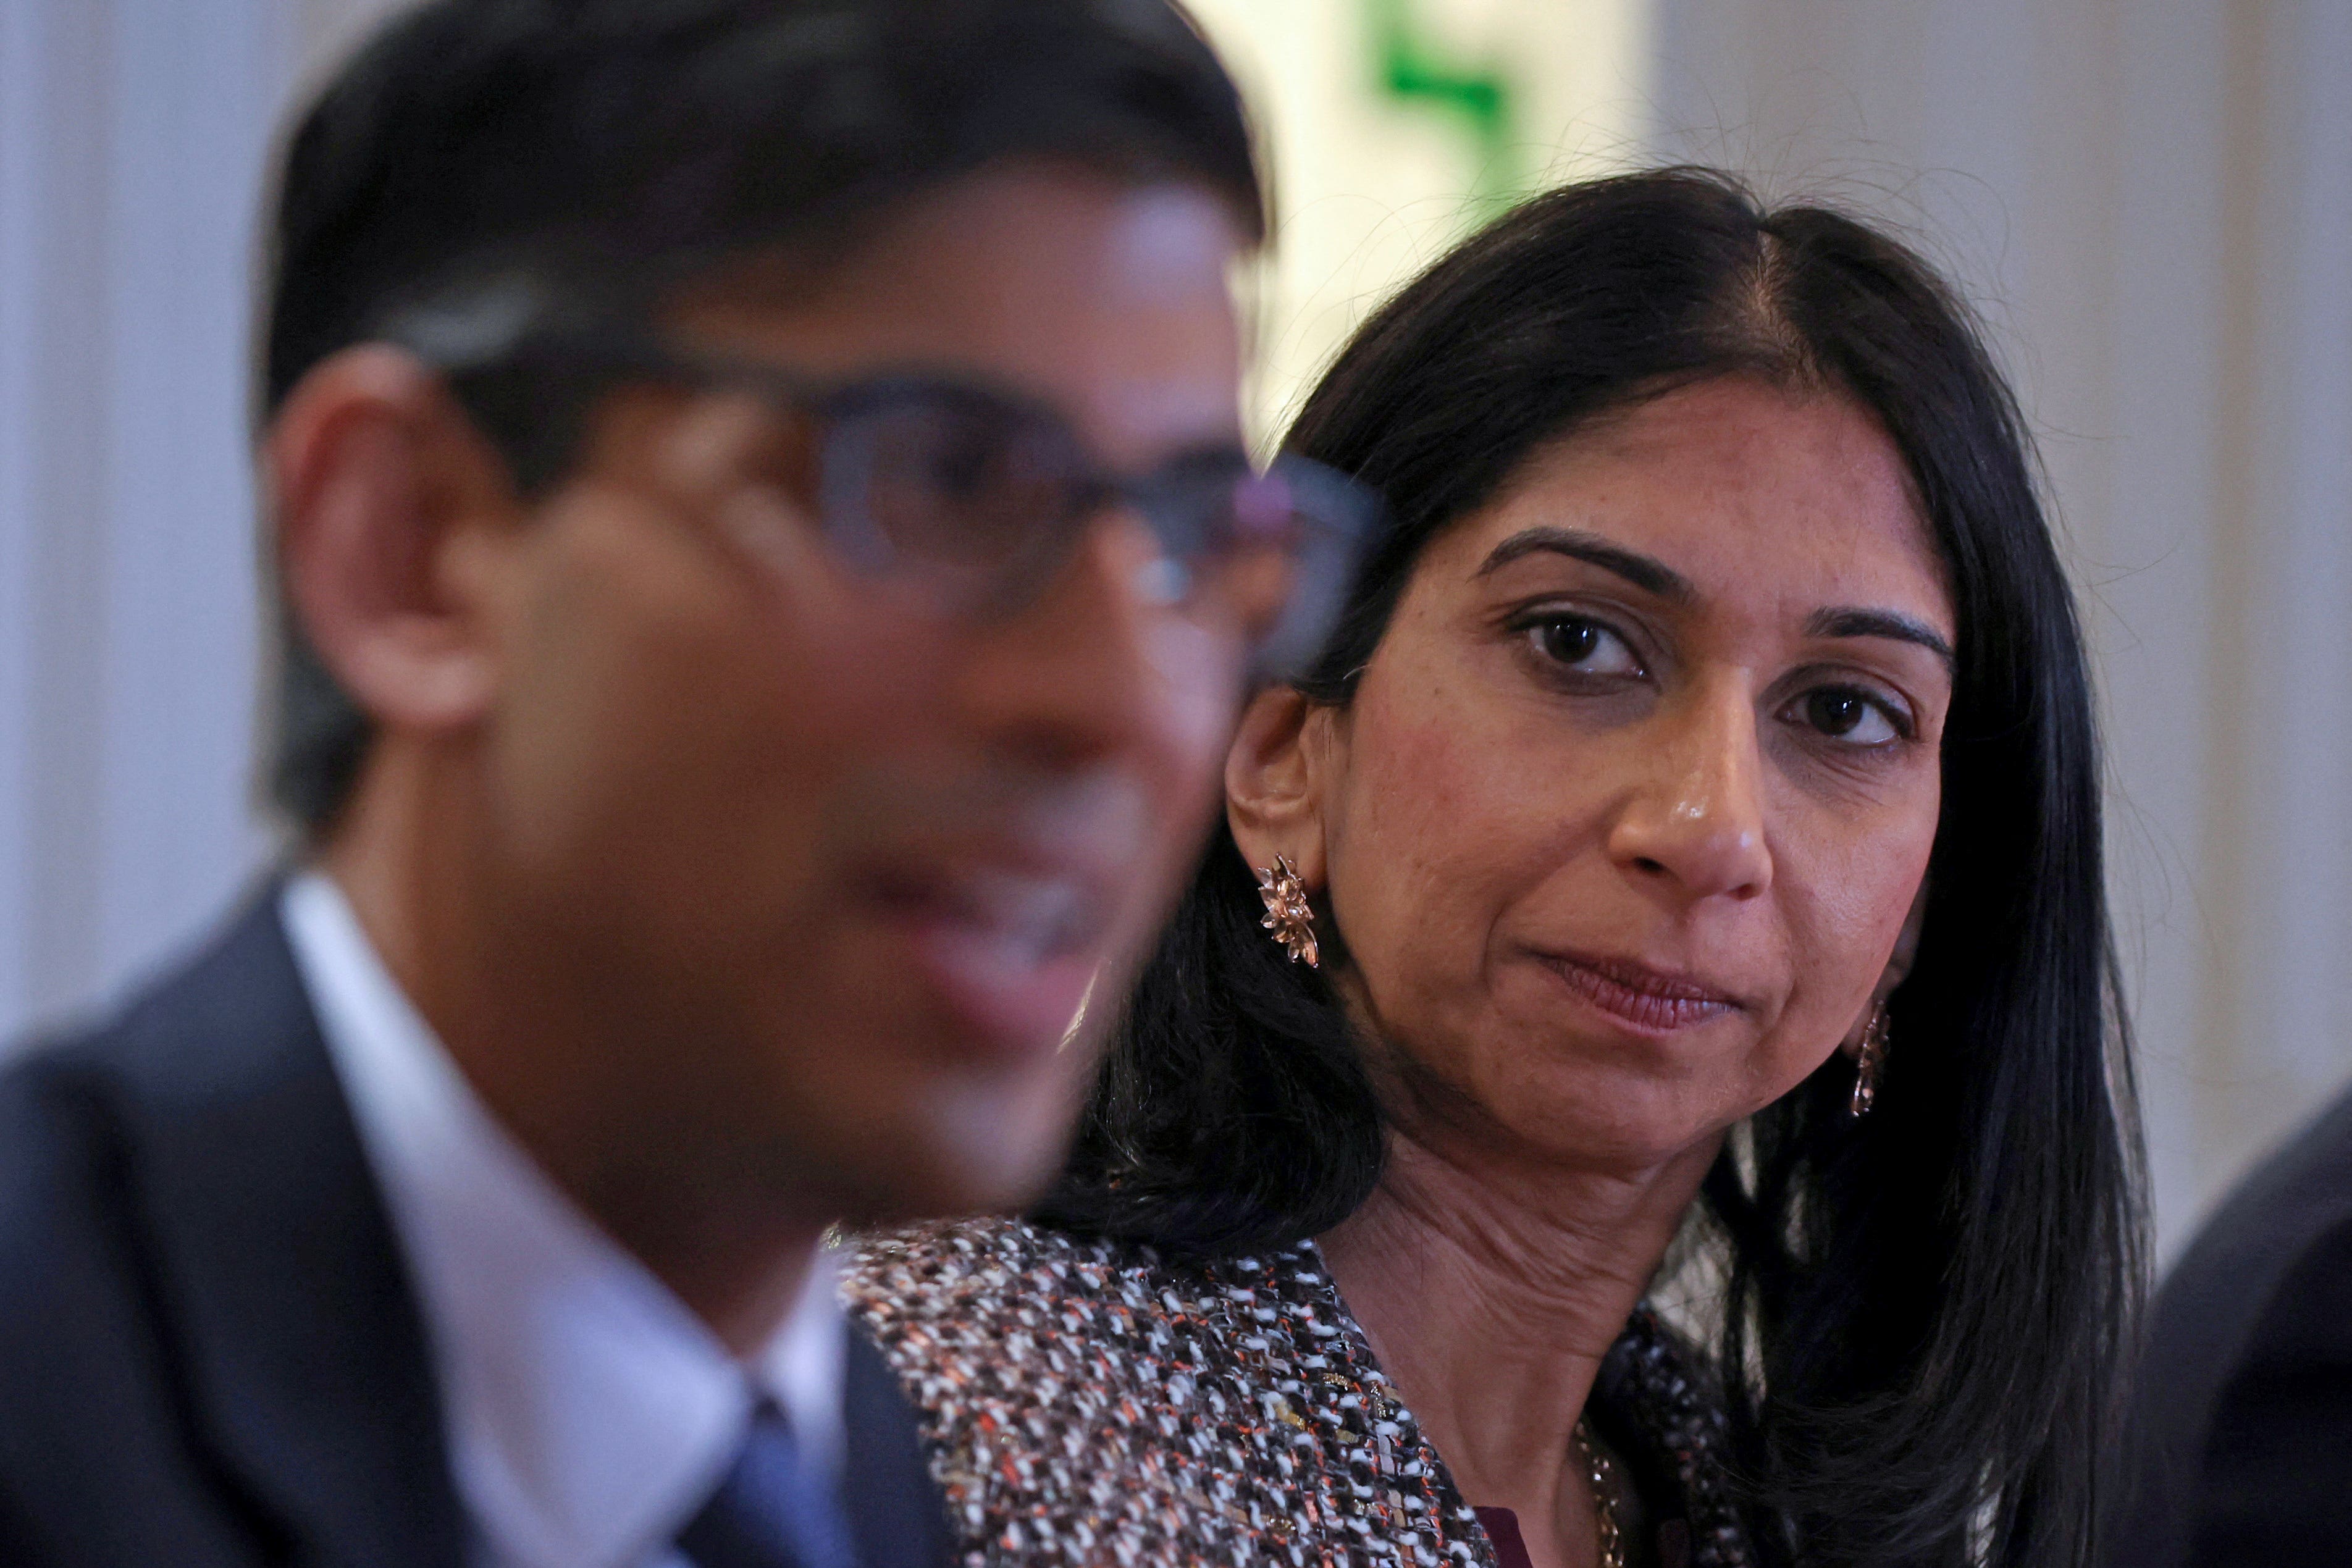 Home Secretary Suella Braverman backed the Prime Minister for making ‘difficult decisions’ on net zero (PA)